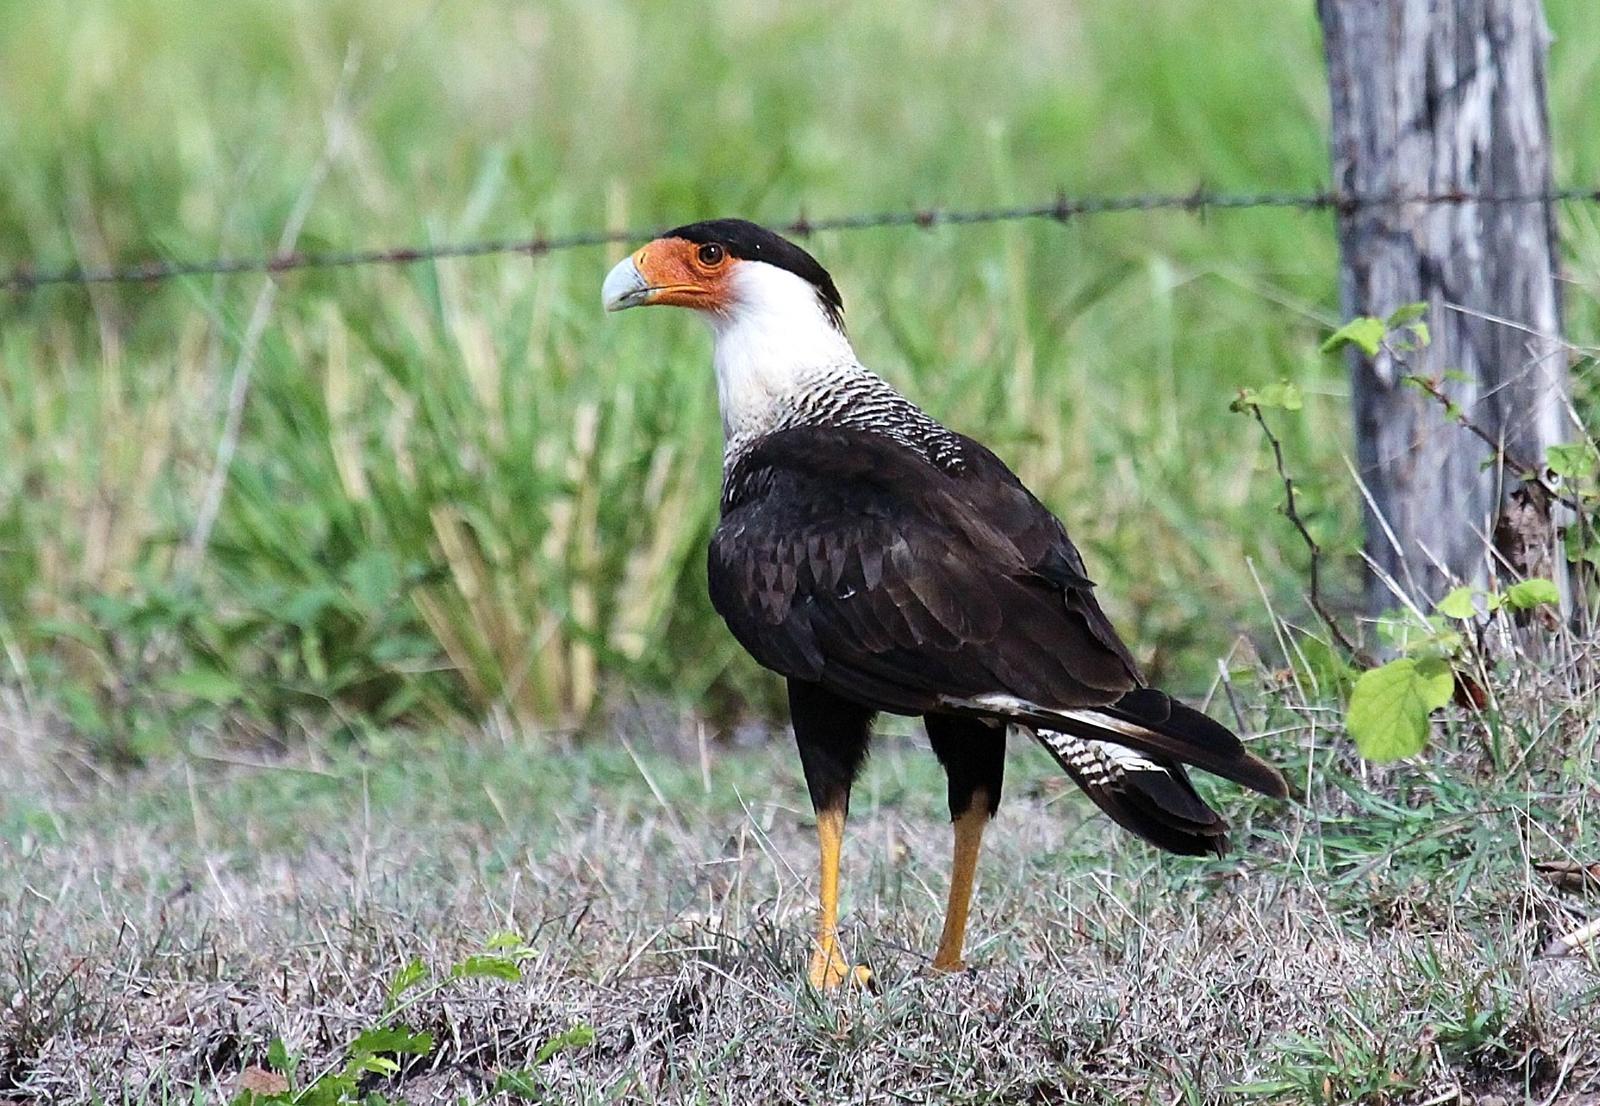 Crested Caracara Photo by Matthew McCluskey